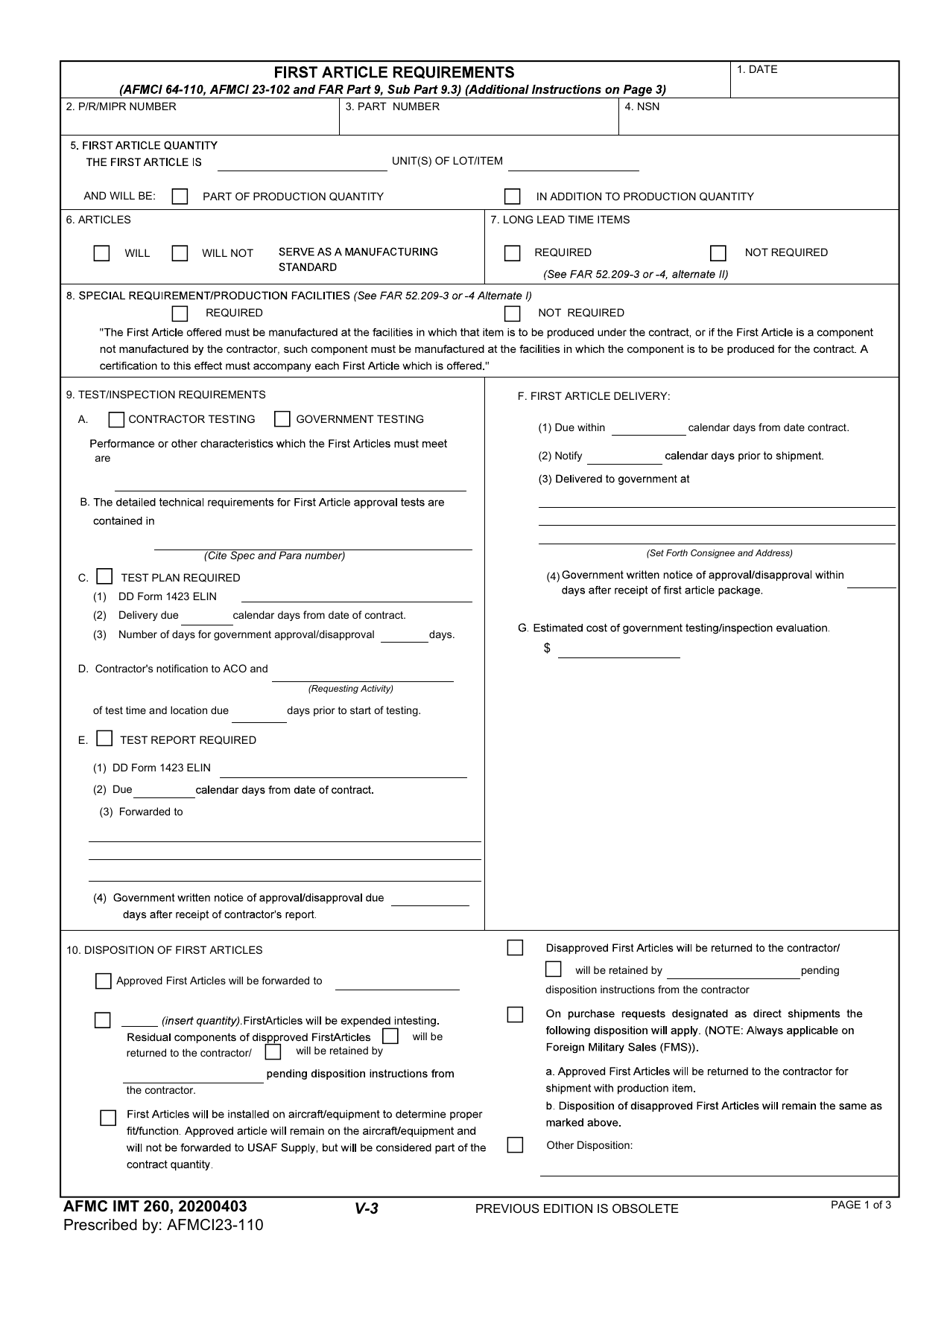 AFMC IMT Form 260 First Article Requirements, Page 1